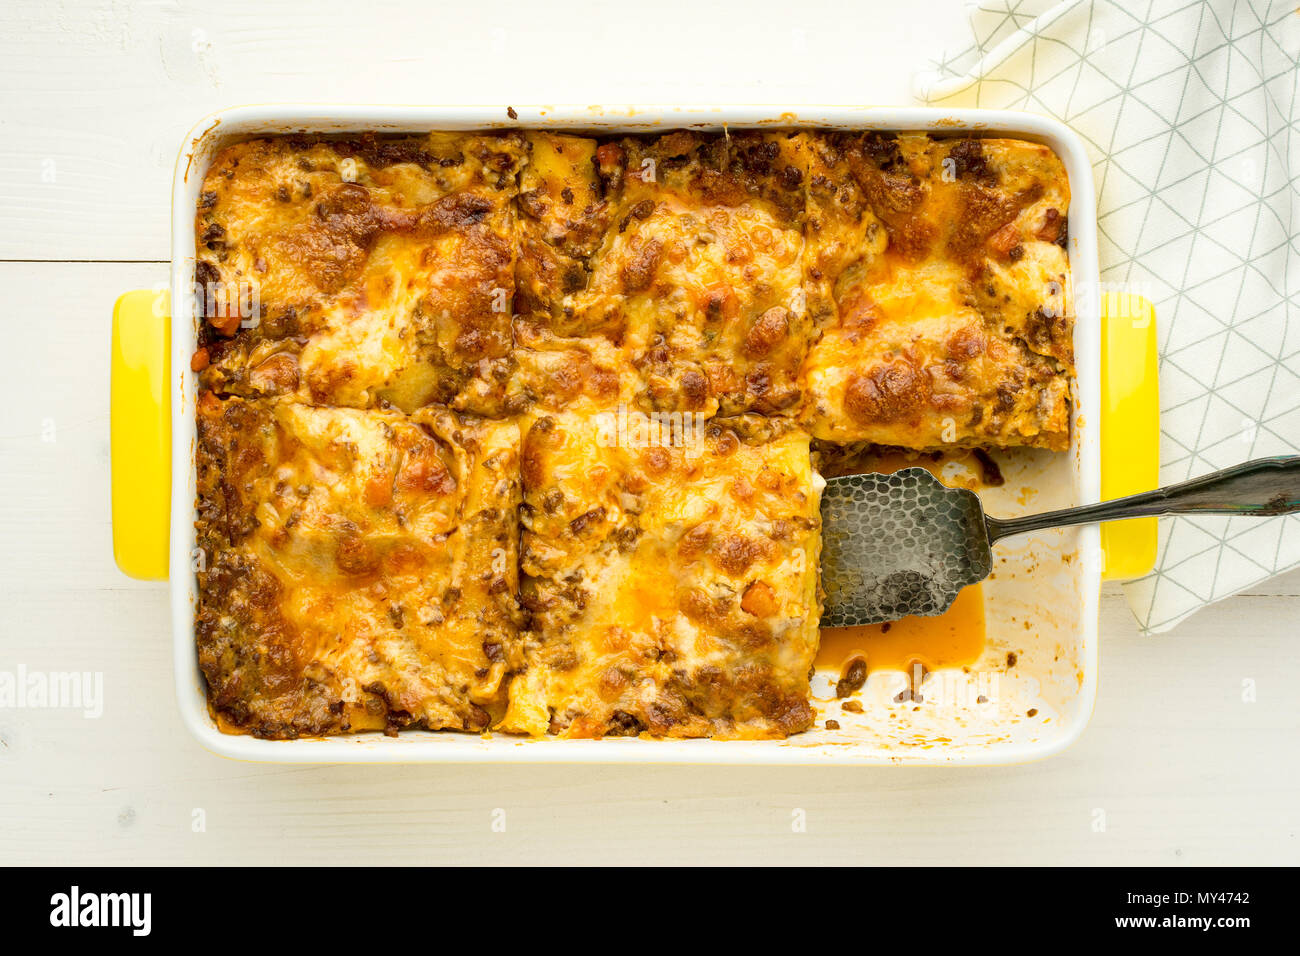 Homemade Meat Lasagna on White Wooden Table. Top View. Stock Photo